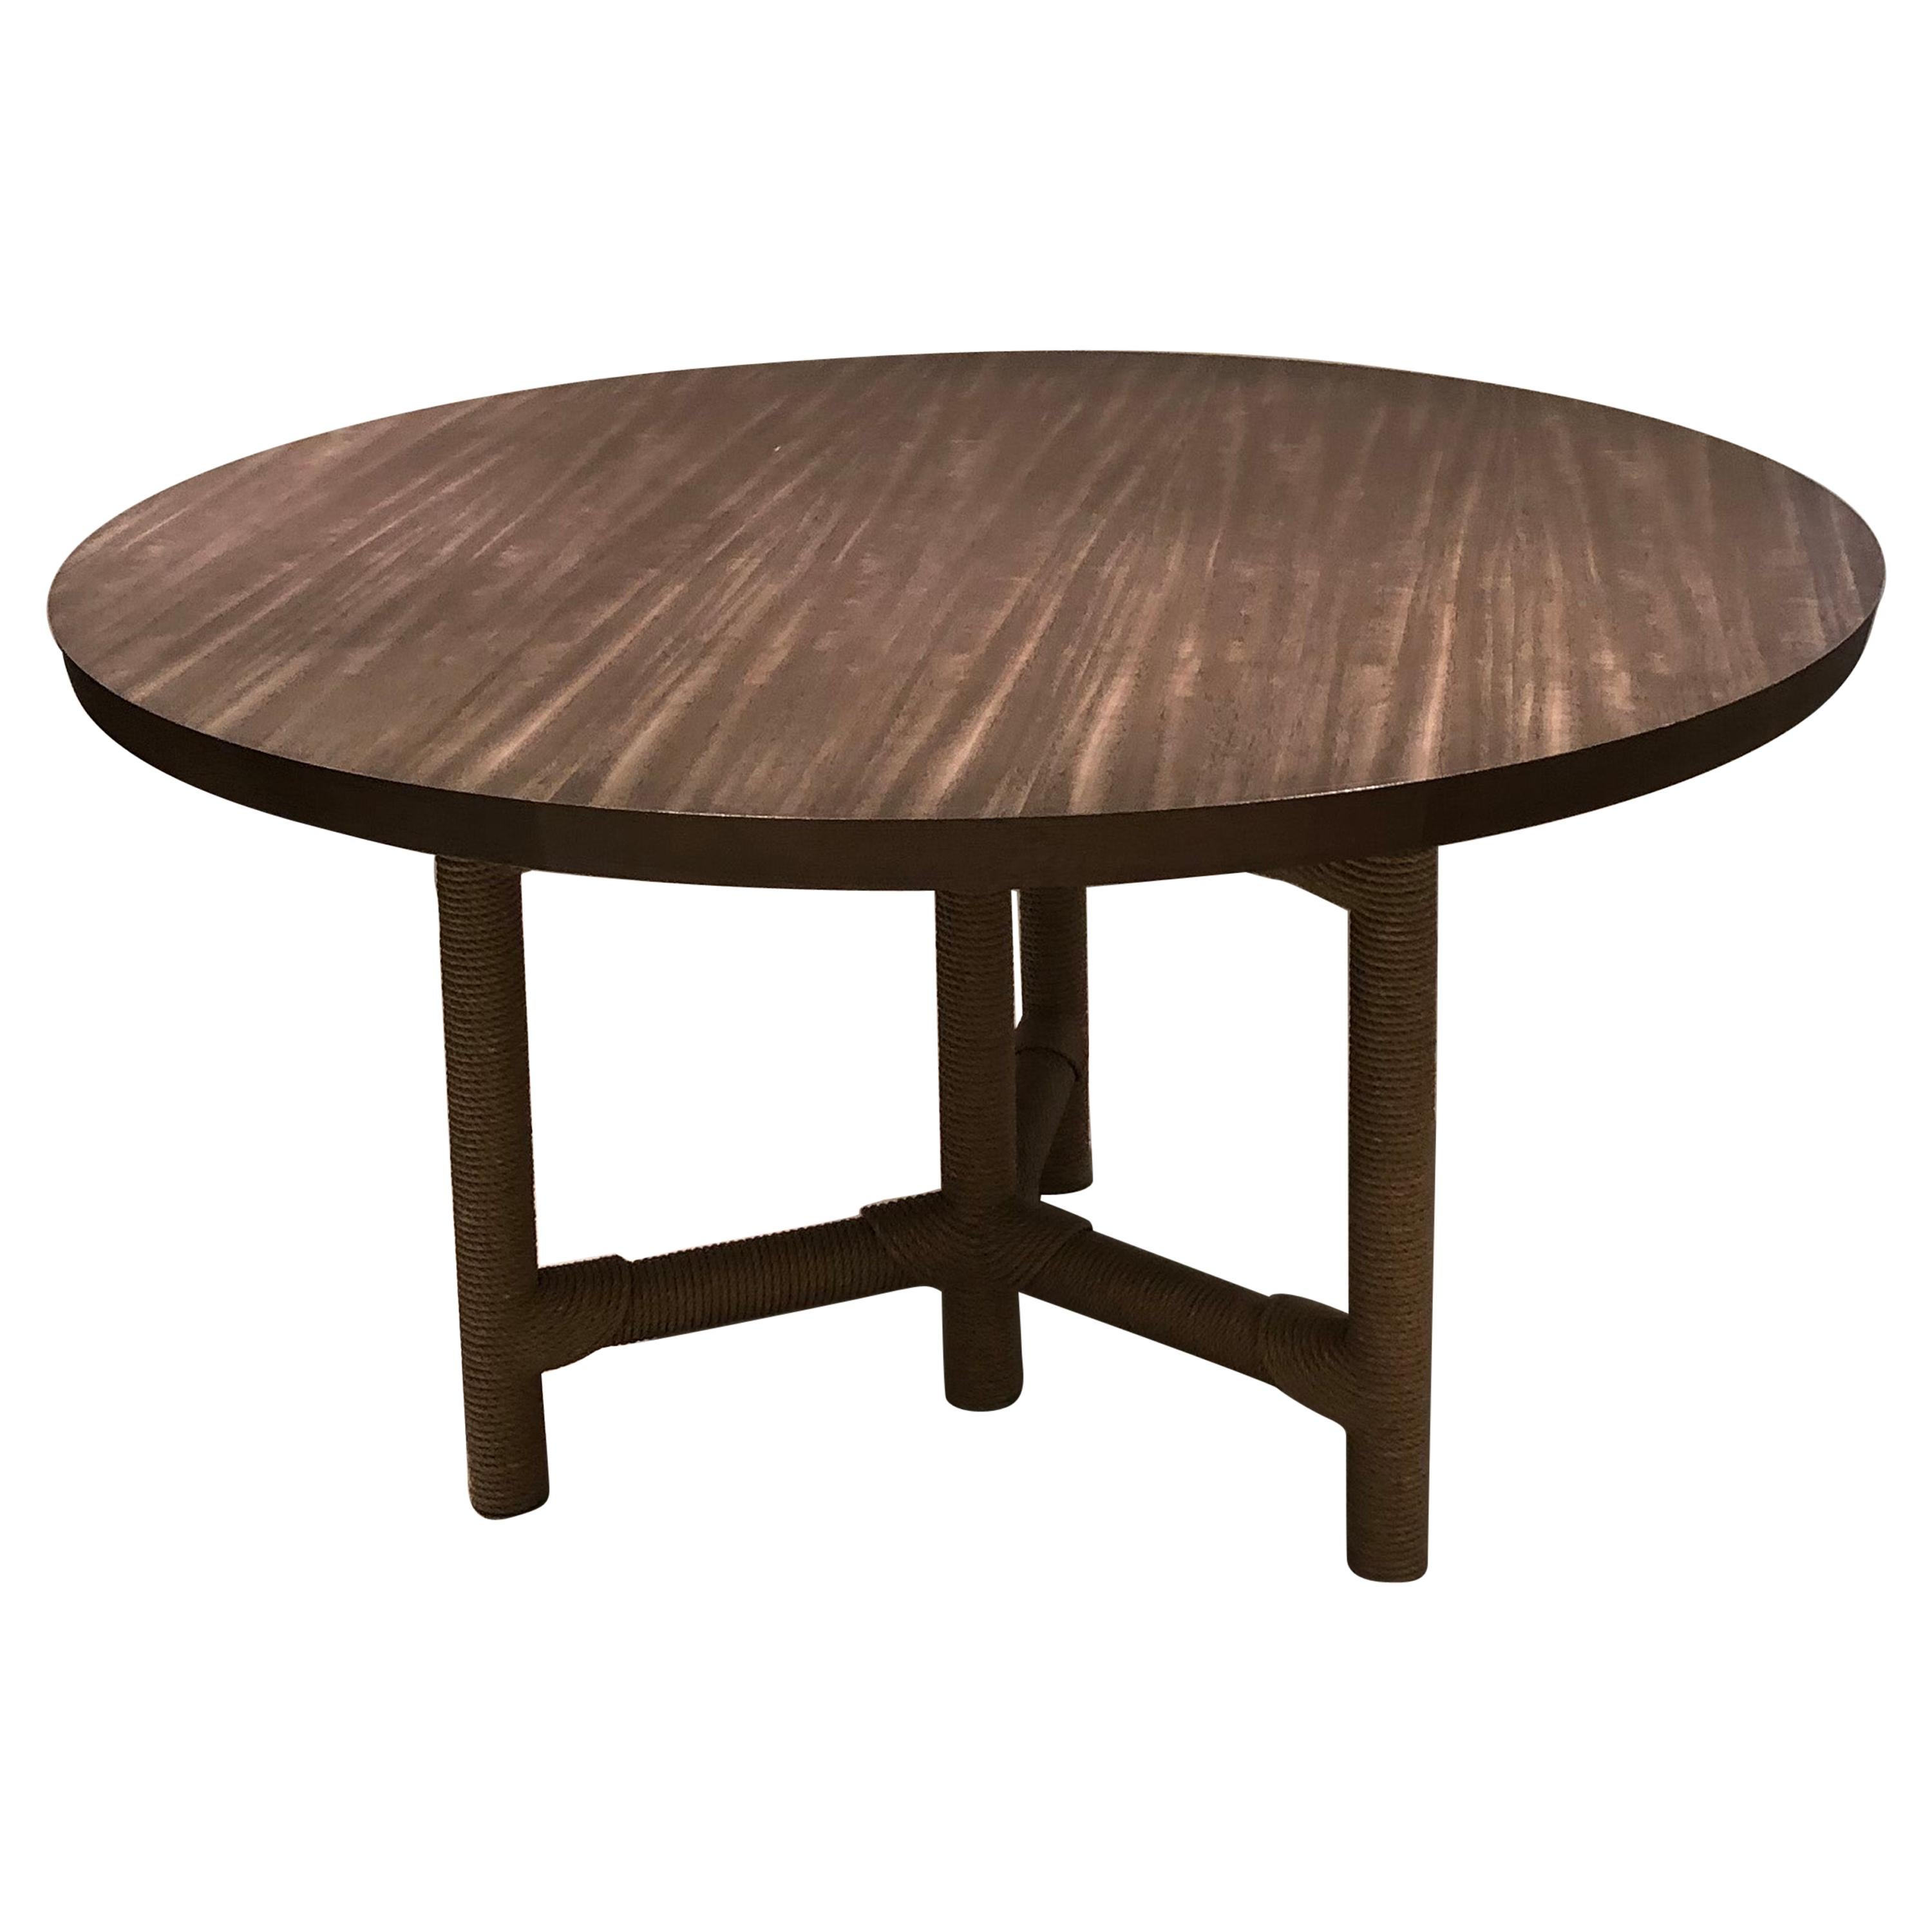 HOLLY HUNT HH2010117 Afriba Table in Paldao 185 by Christian Astuguevieille For Sale